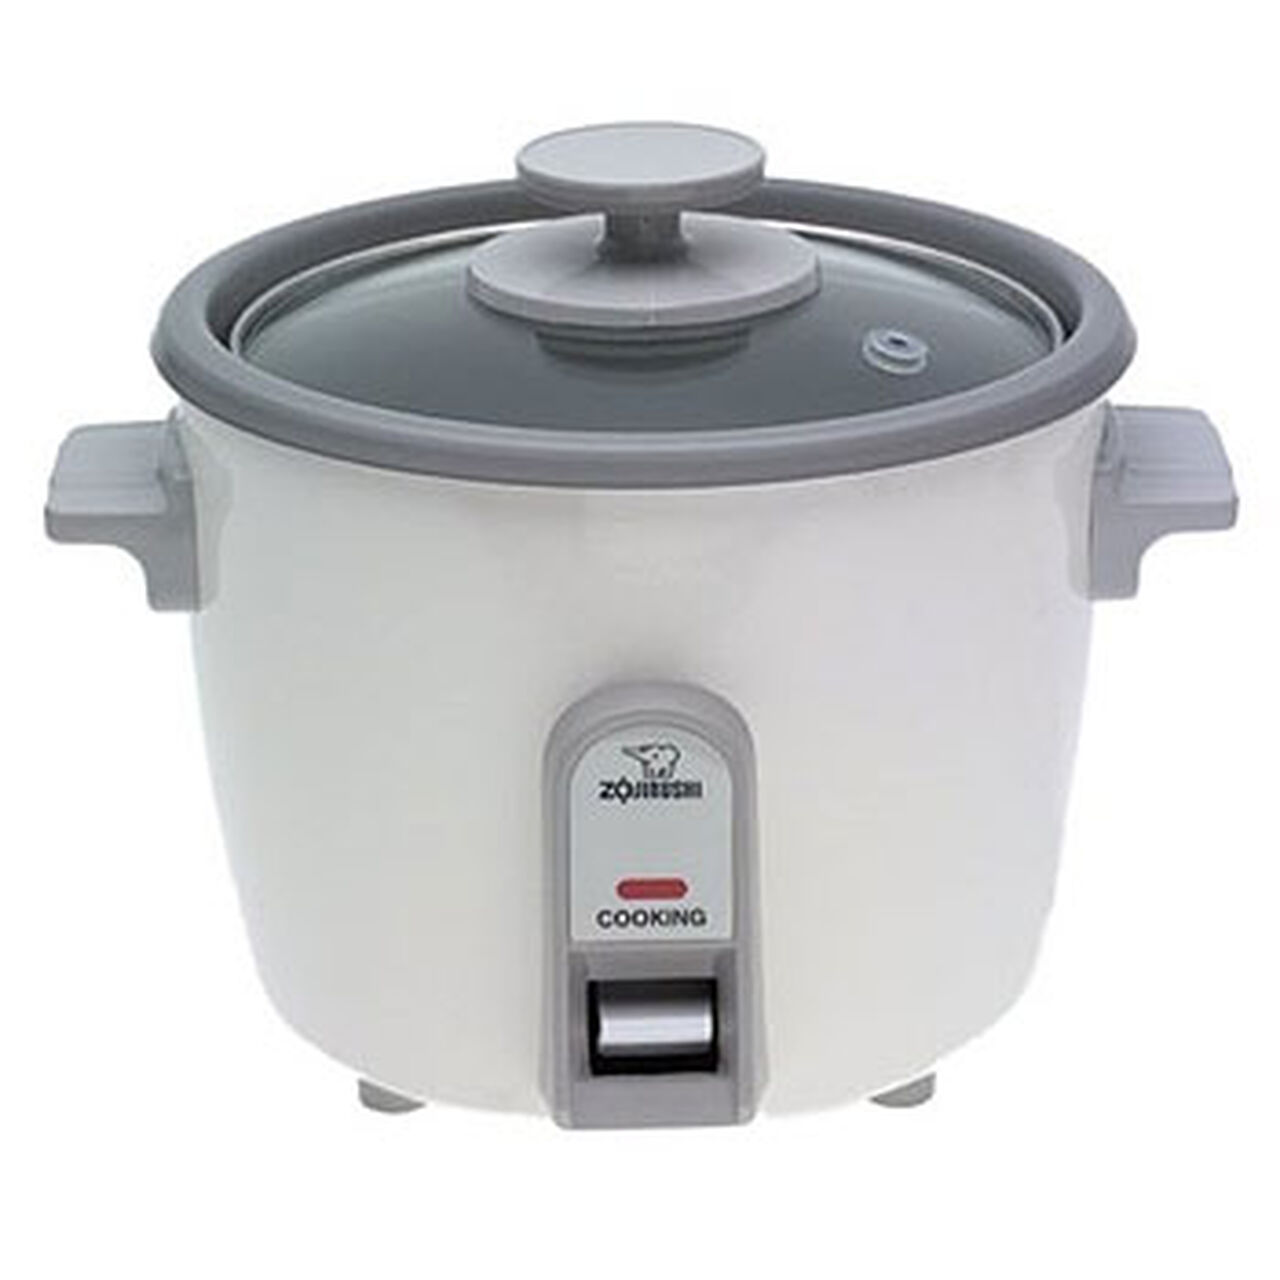 Zojirushi 3-Cup Rice Cooker # NHS-06, , large image number 0